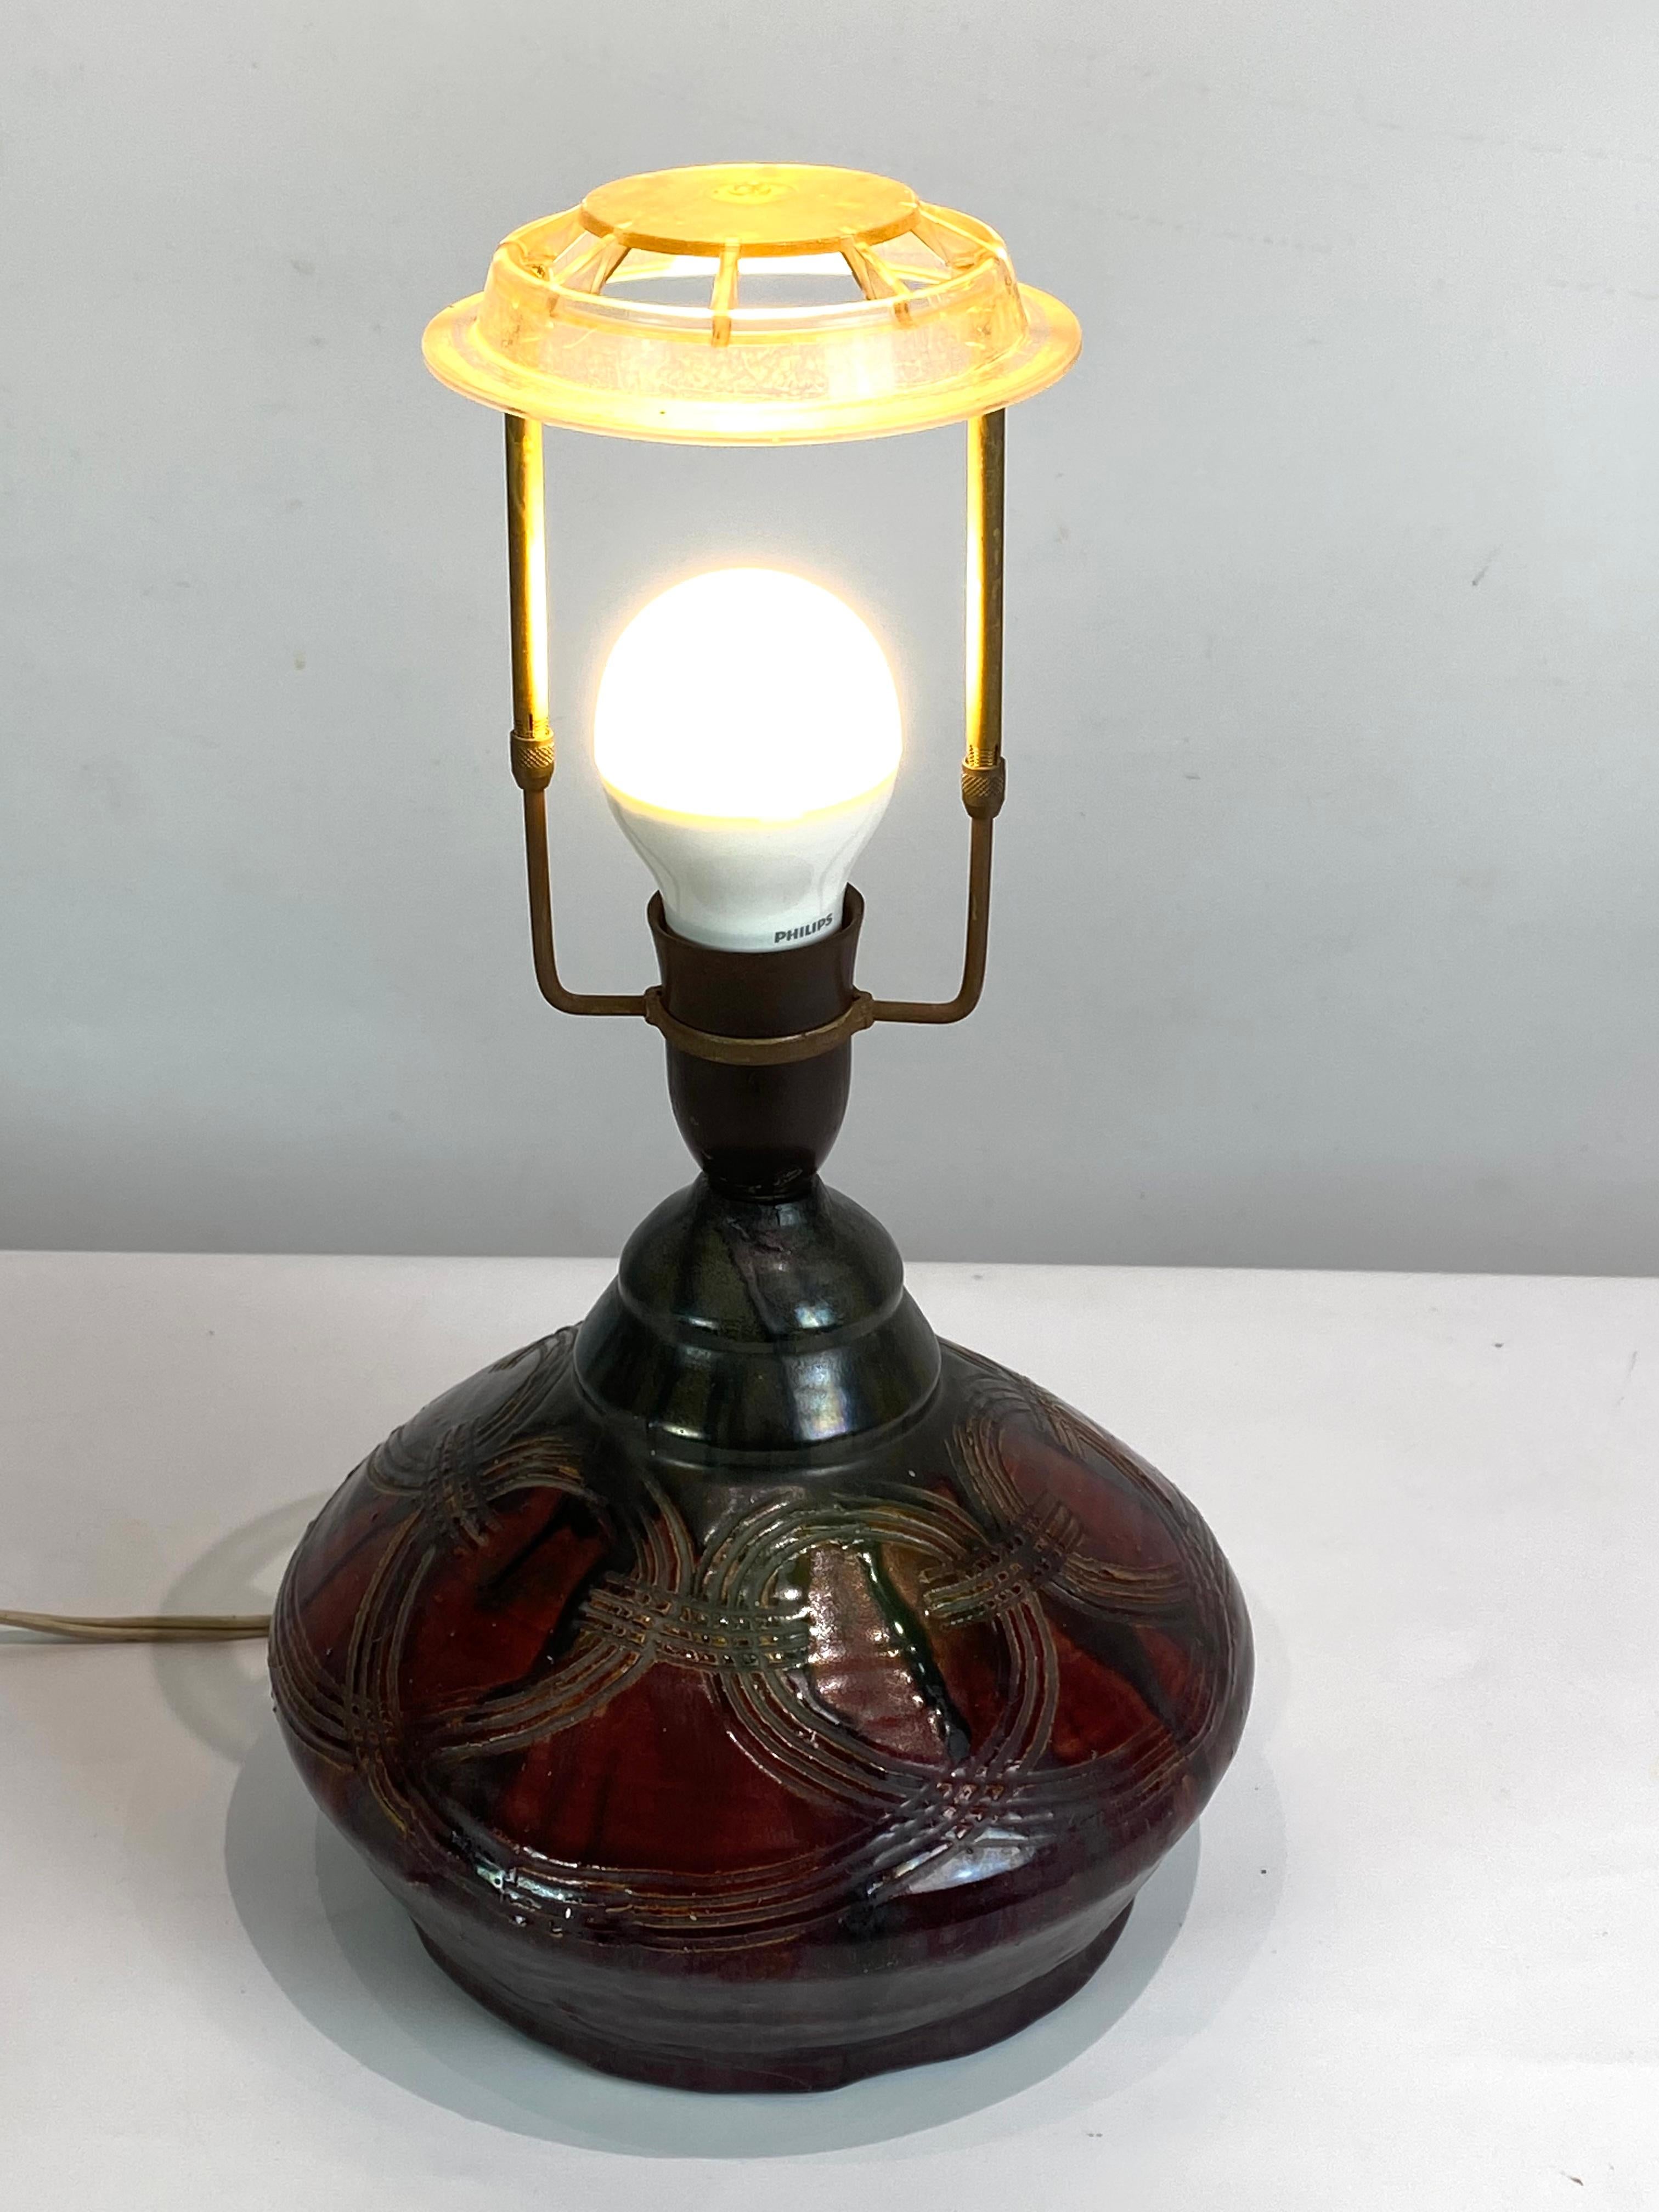 Danish Ceramic Table Lamp in Brown Colors with Paper Shade, by Herman A. Kähler, 1940s